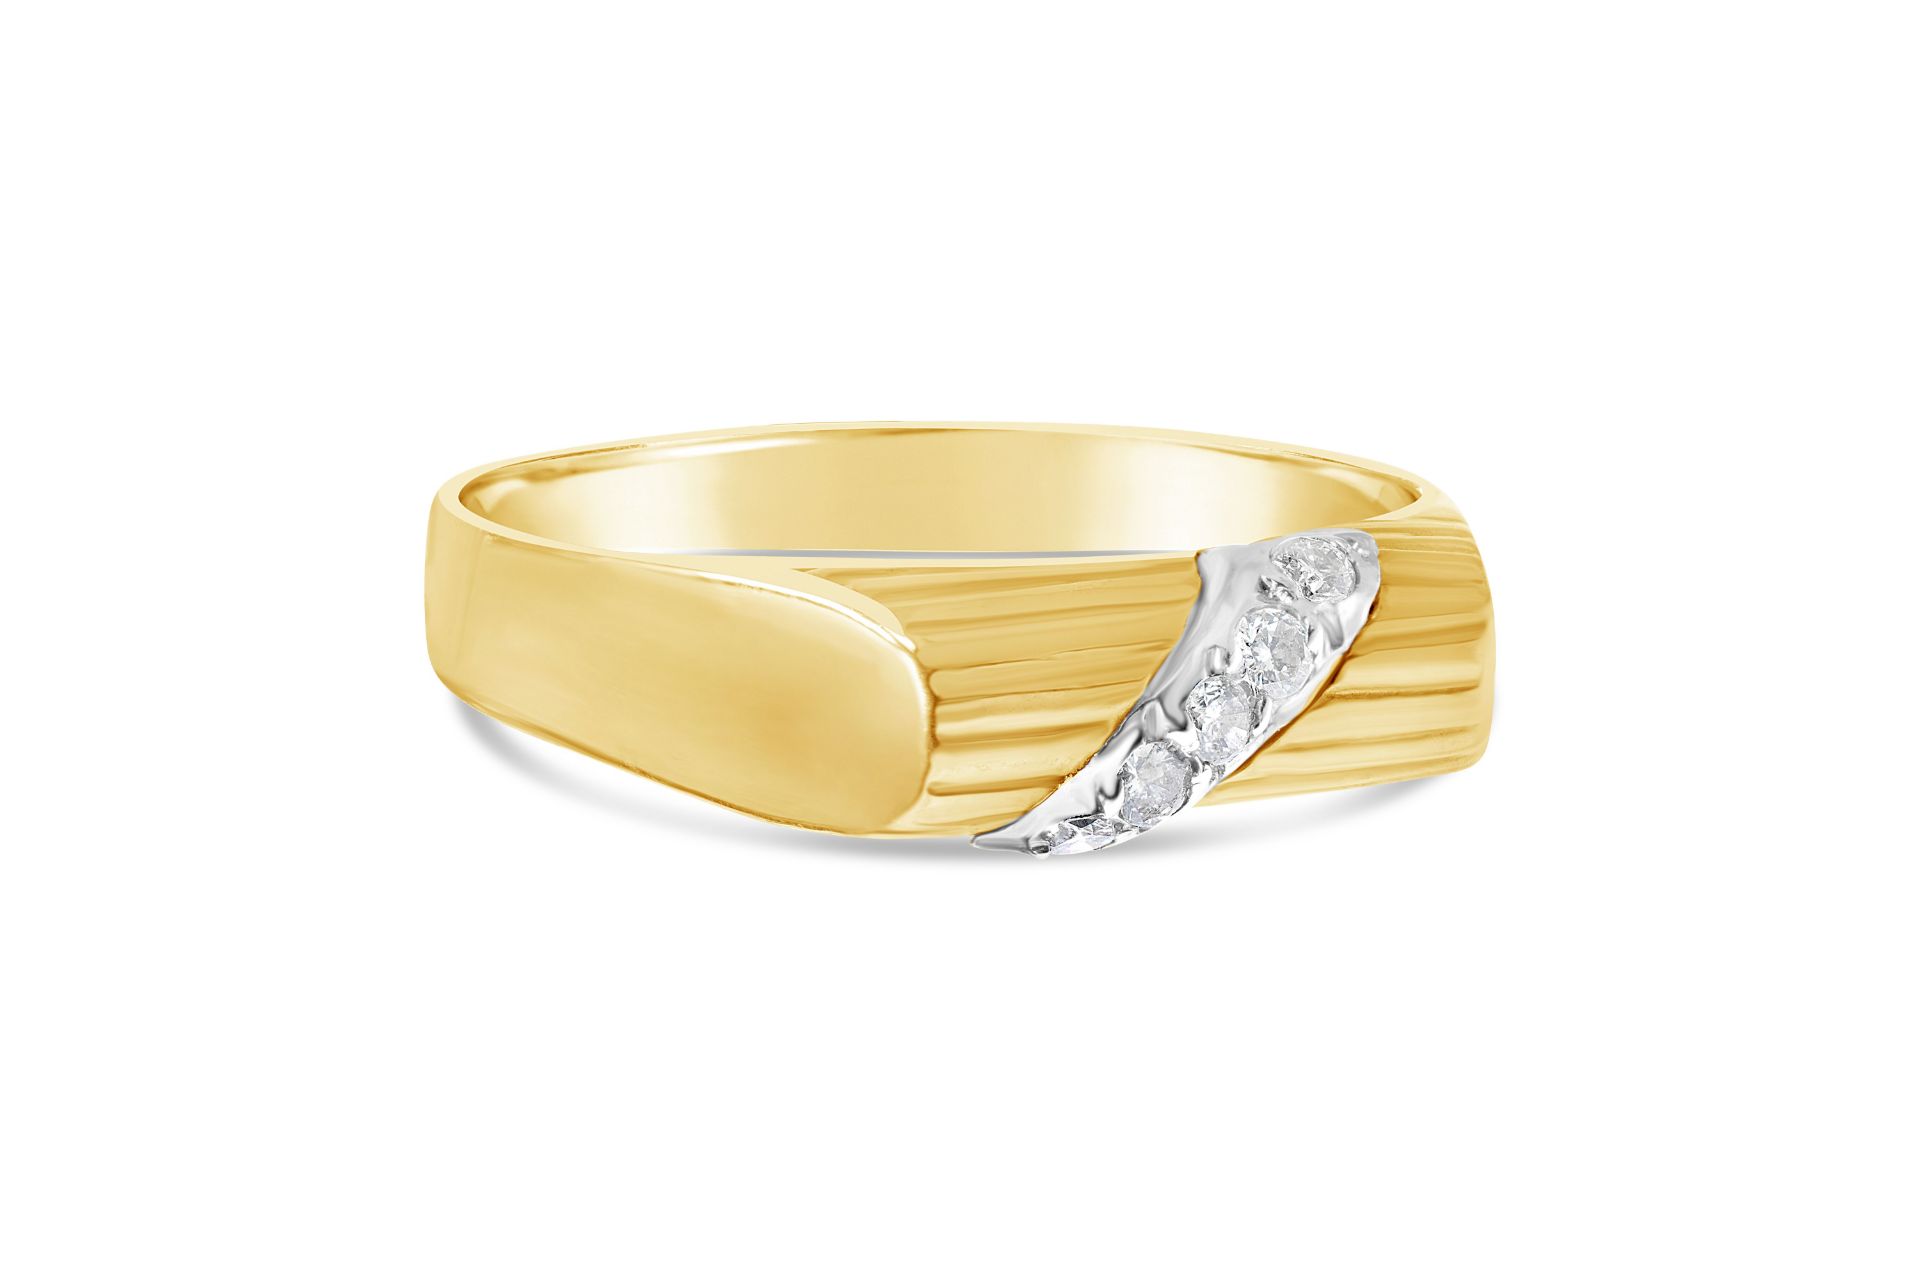 Diamond Ring, Metal 9ct Yellow Gold, Weight (g) 1.61, Diamond Weight (ct) 0.03, Colour H, Clarity